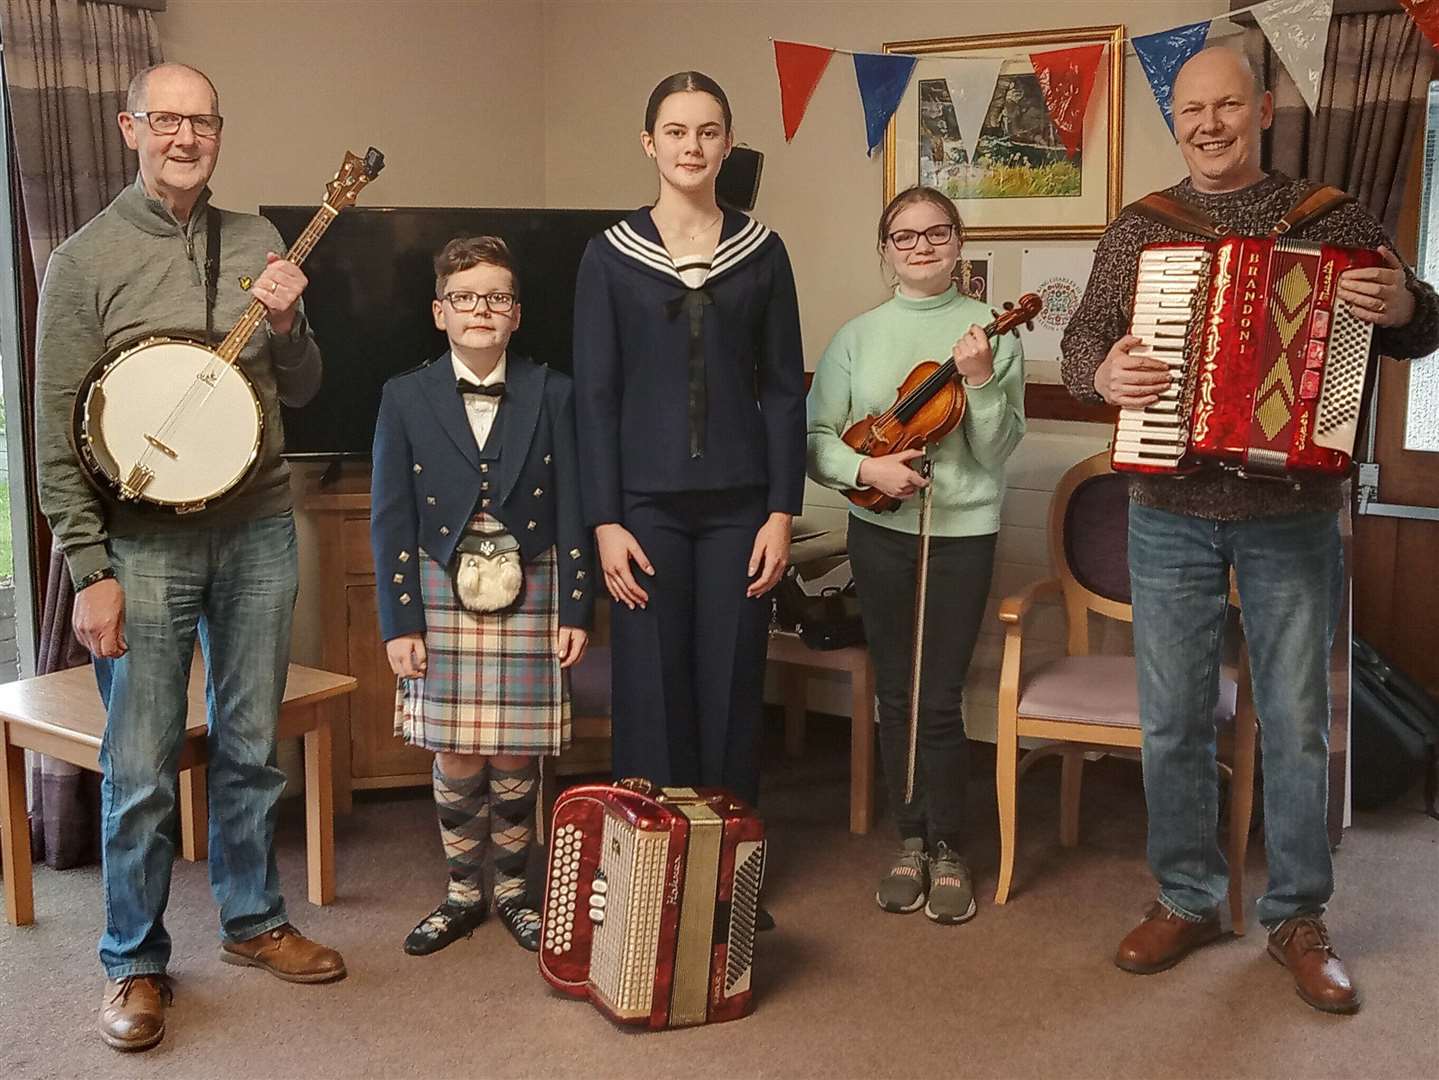 From left: Farquhar MacGregor on banjo, Jamie and Saphie Mackay (Highland dancers), Blythe Bullen on fiddle and Addie Harper on accordion at Wick's Seaview House care home.